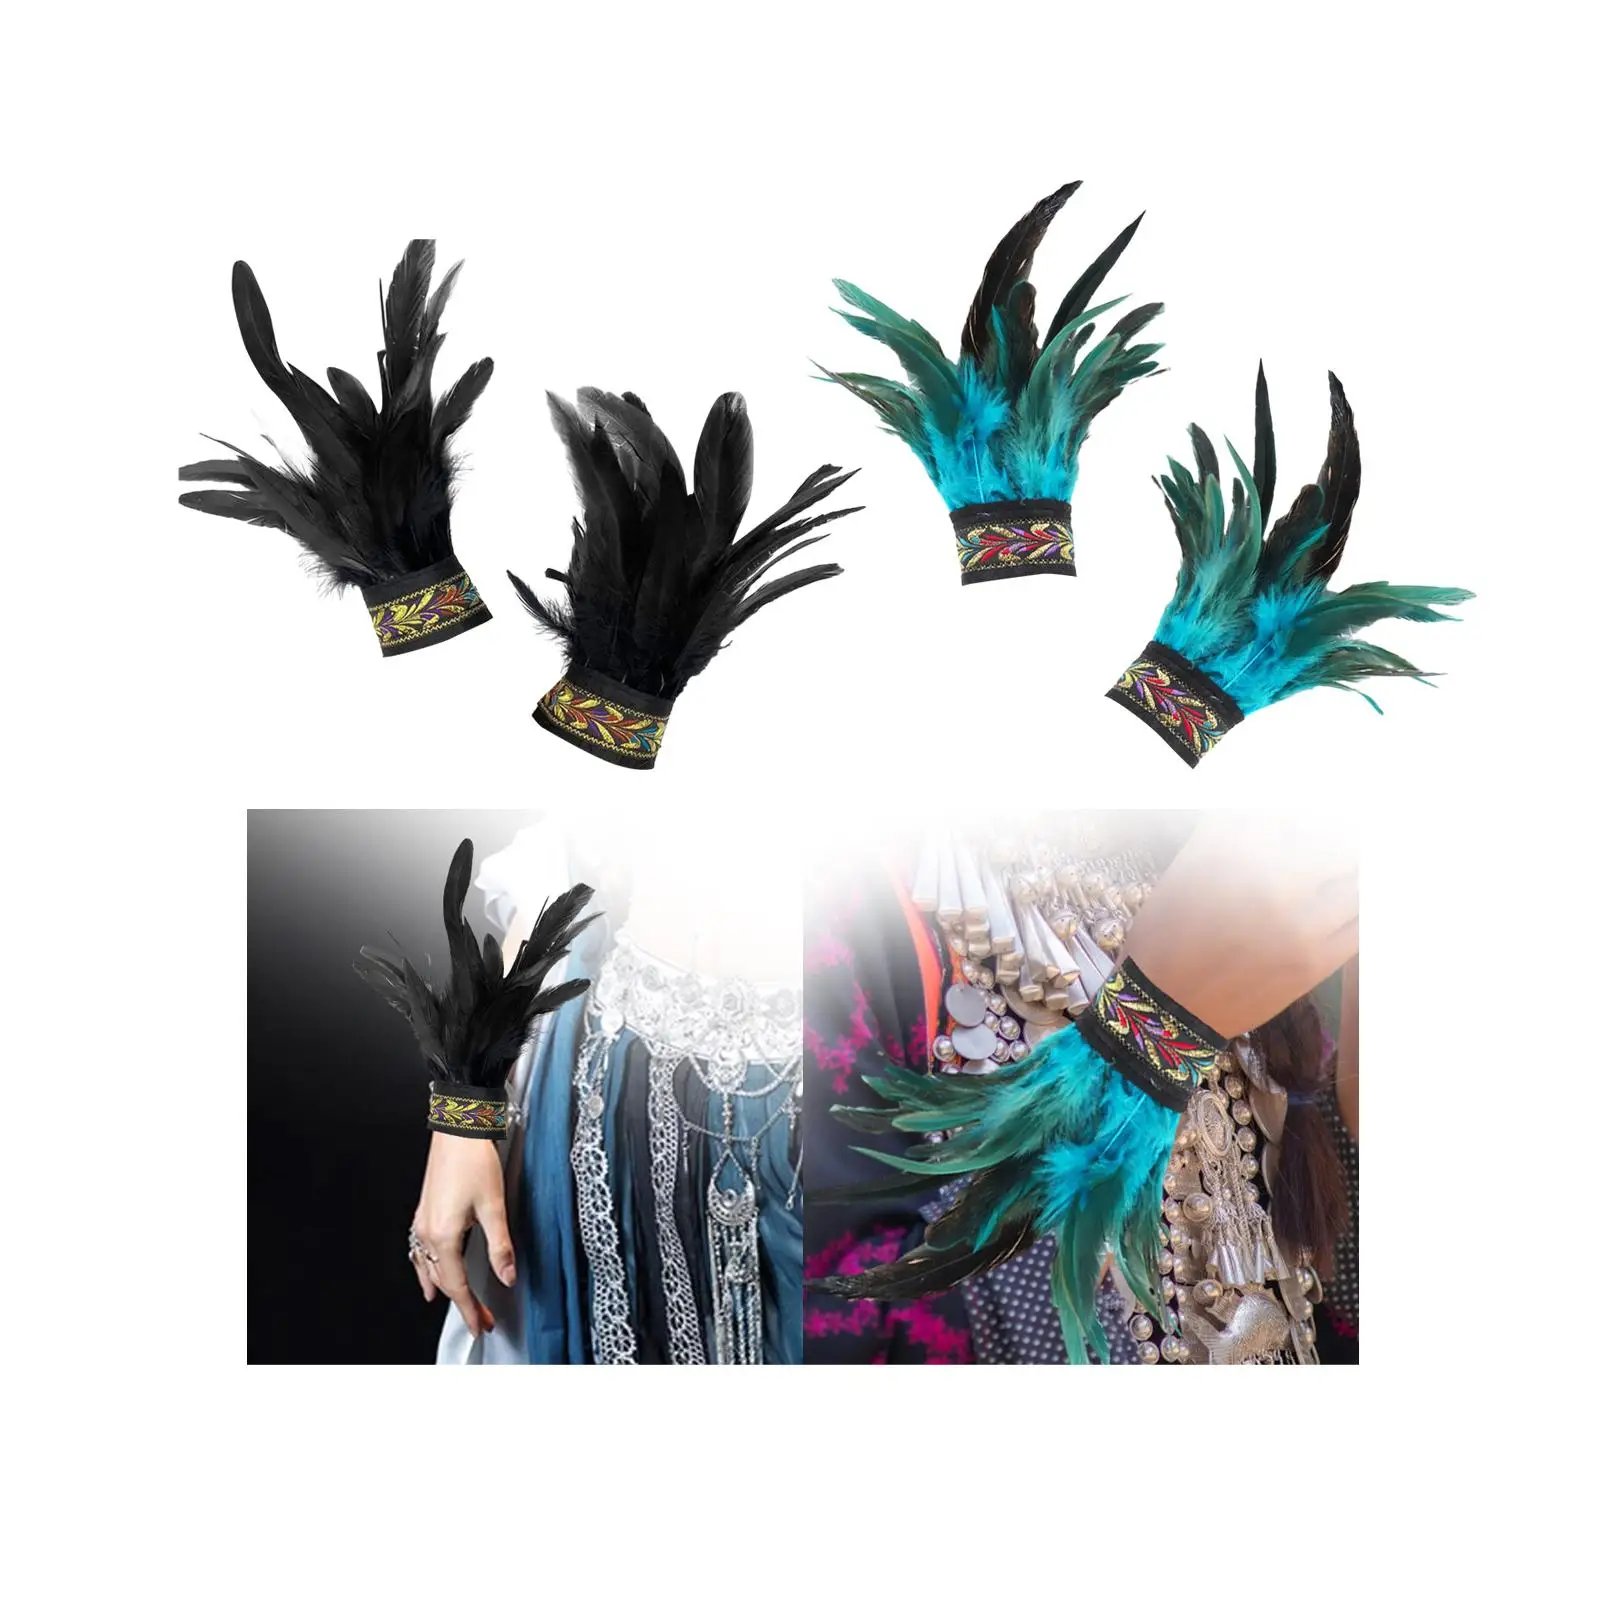 Feather Wrist Cuffs Feather Gloves Arm Warmers Gothic Faux Fur Cuff Sleeves for Halloween Cosplay Costume Stage Decorations